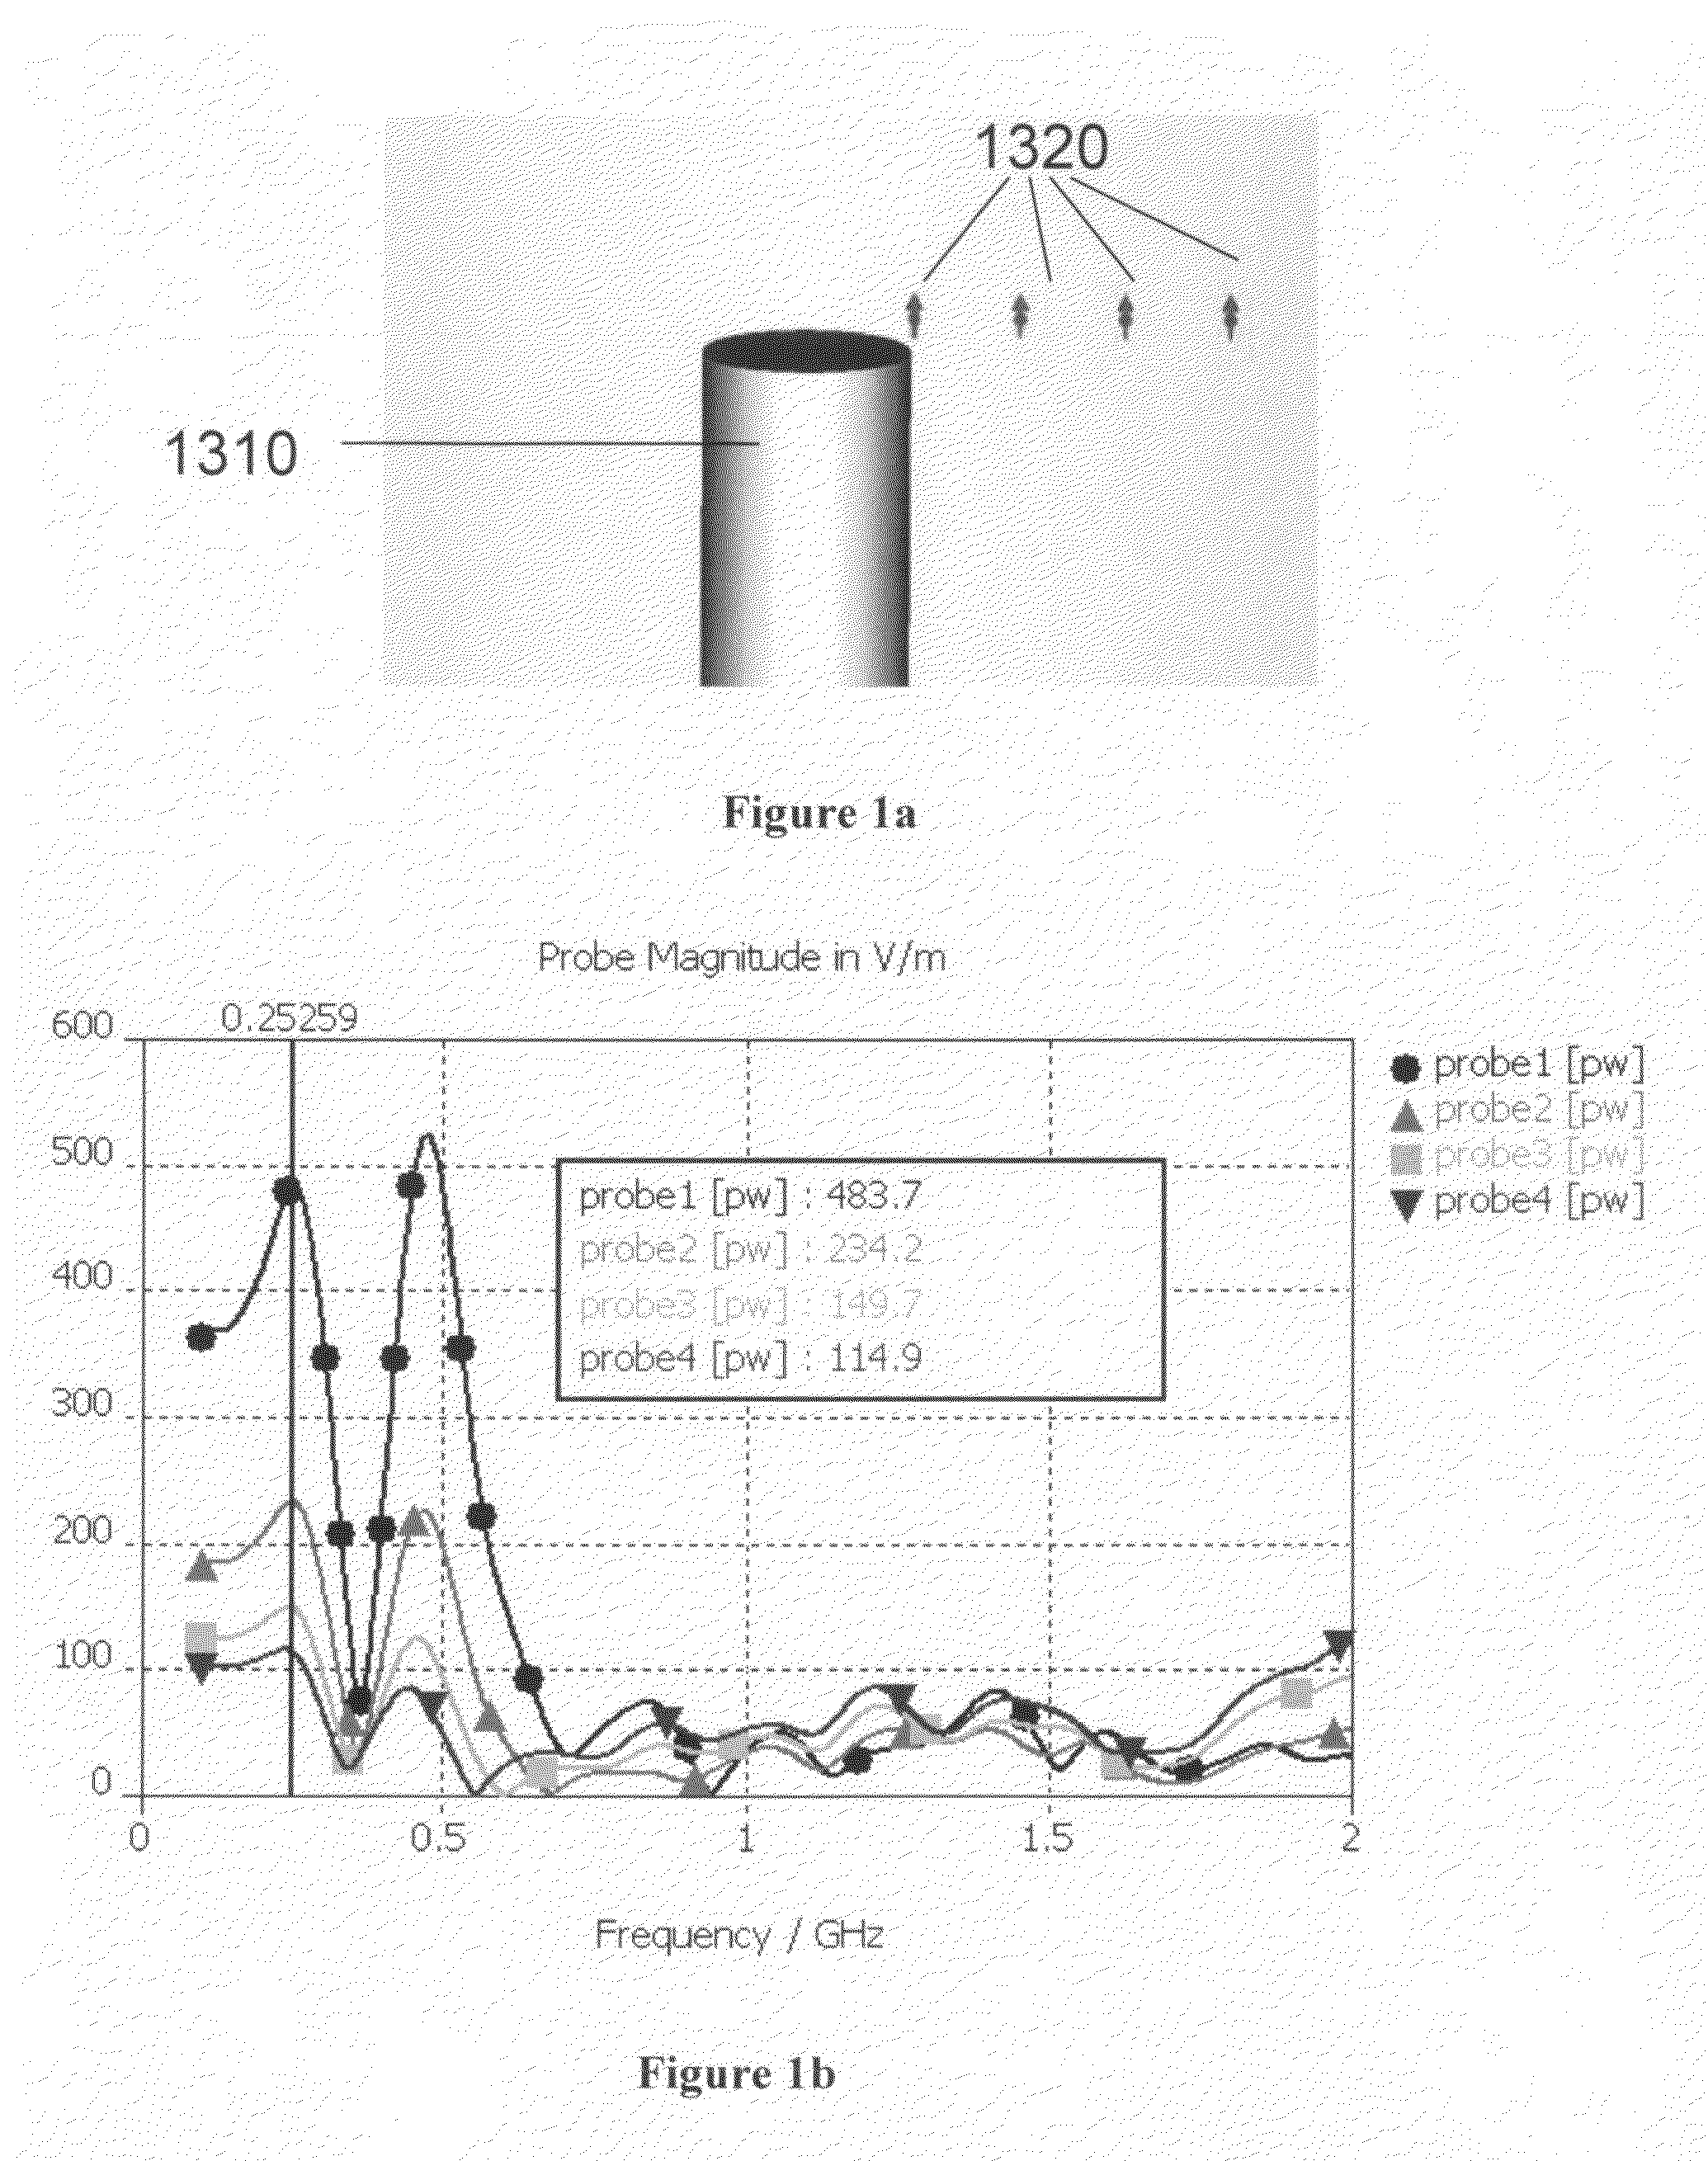 Apparatus and method for concentrating electromagnetic energy on a remotely-located object